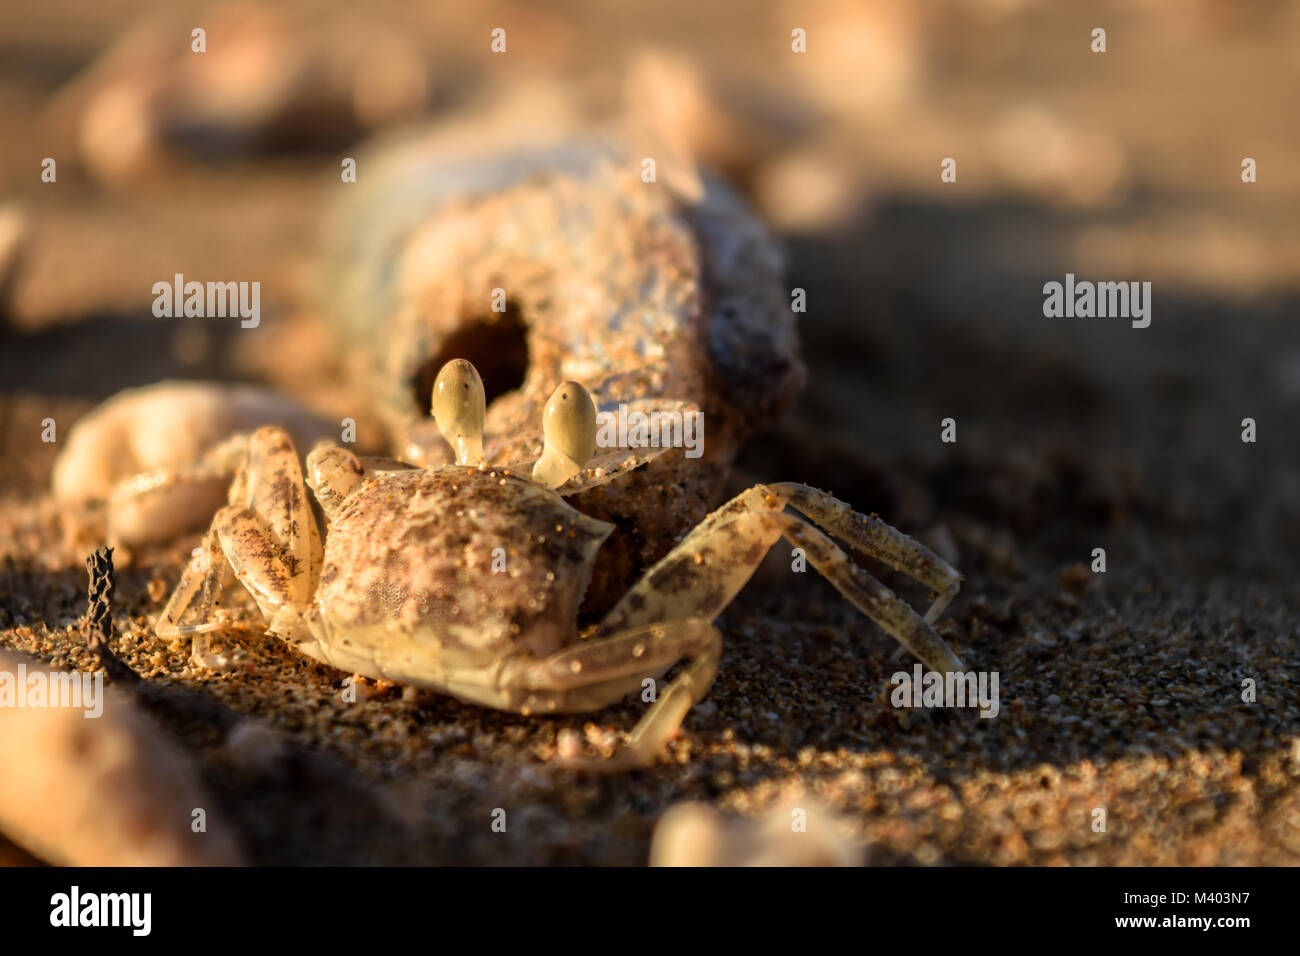 Small pale crab eating a dead fish on a beach at sunset Stock Photo